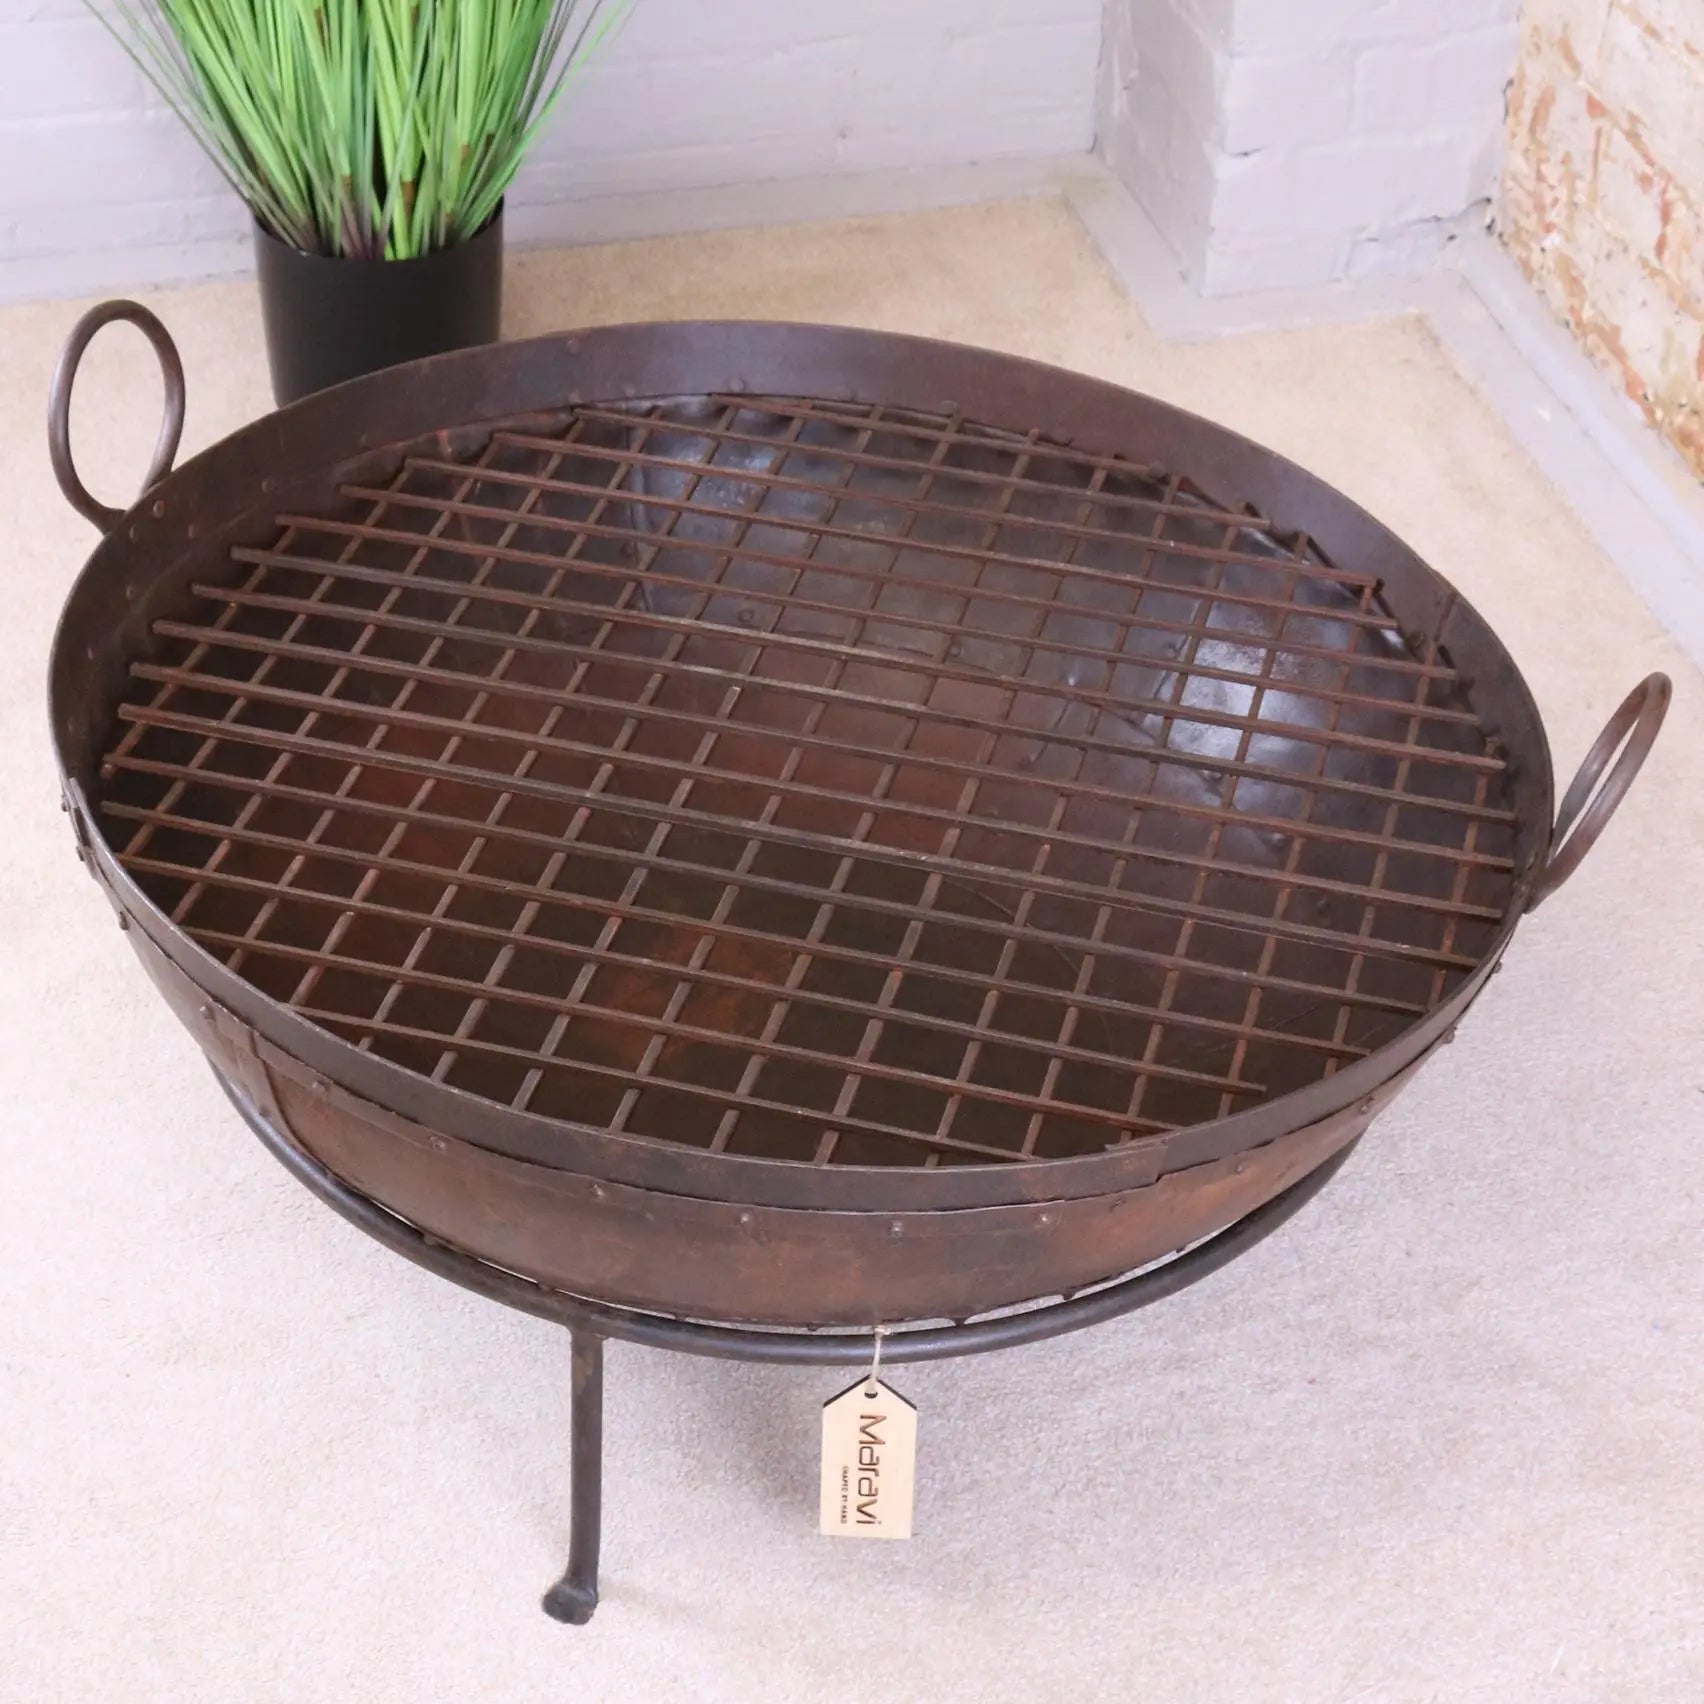 Vintage Kadai Bowl with Stand Garden Fire Pit Bowls  80cm Size Top View